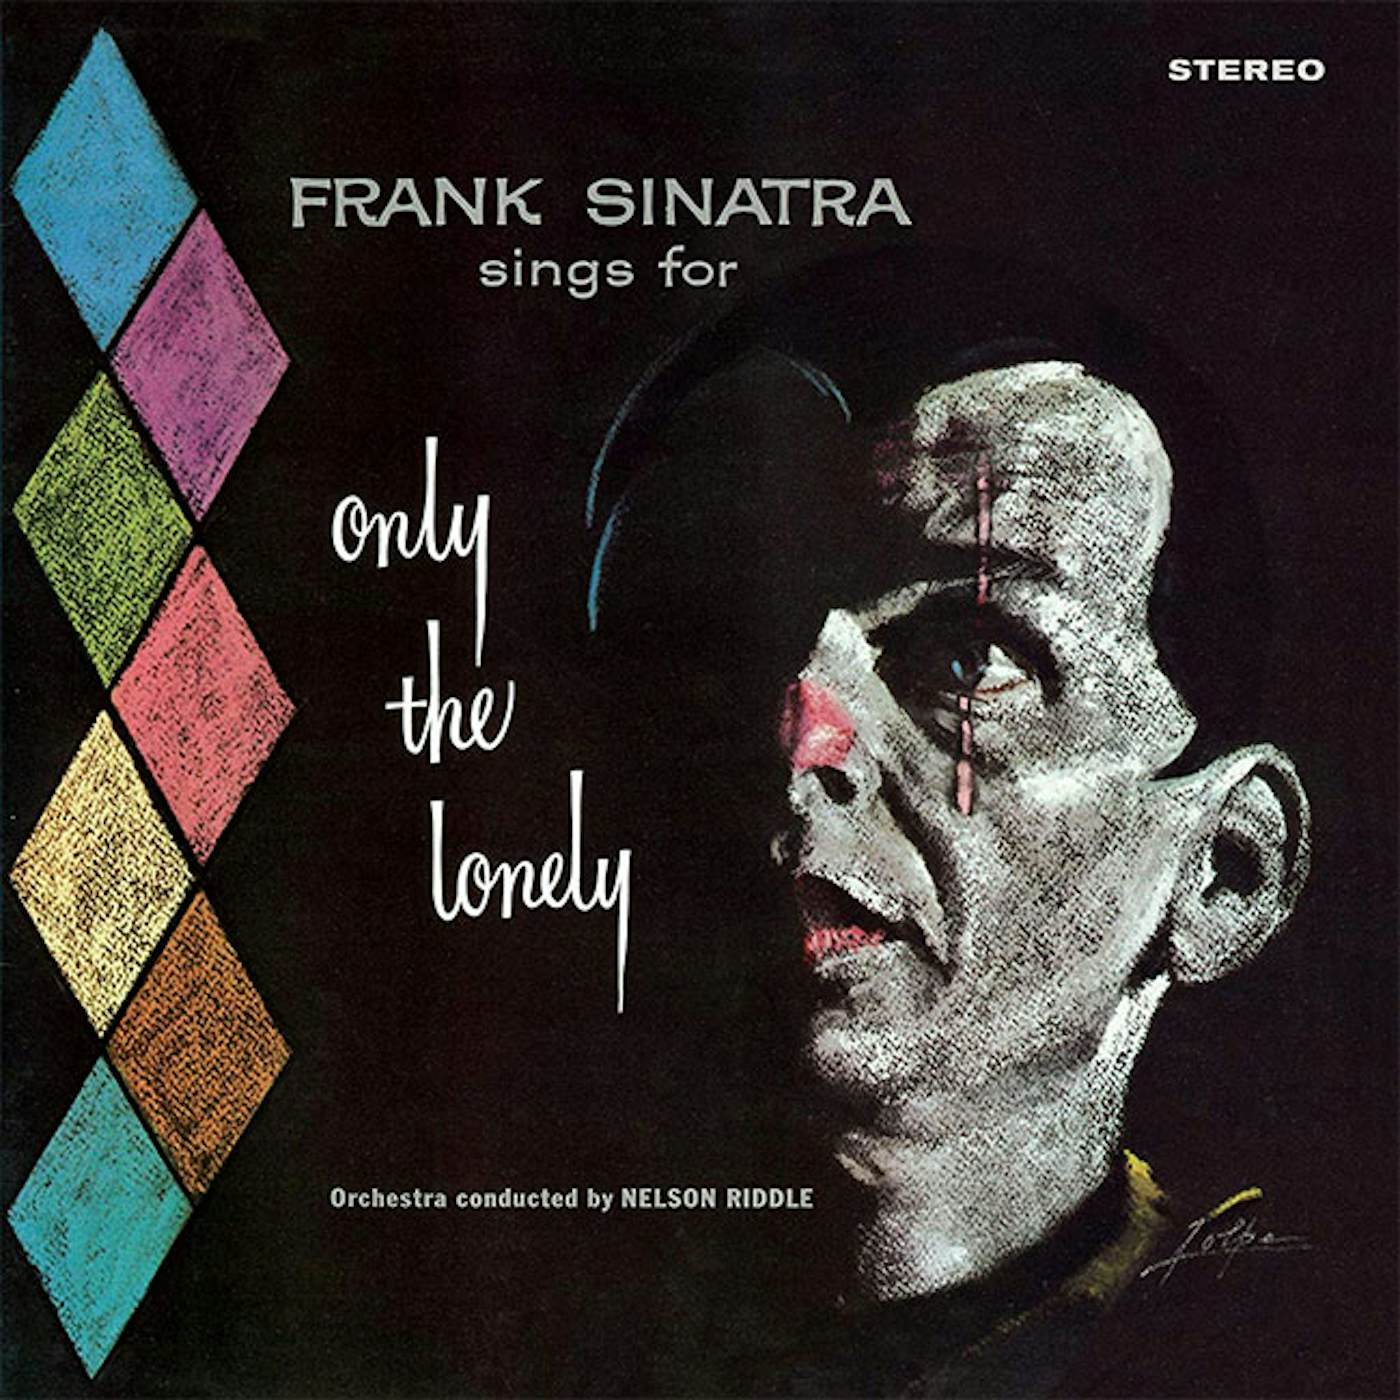 Frank Sinatra ONLY THE LONELY + 1 BONUS TRACK! LIMITED EDITION IN TRANSPARENT BLUE COLORED VINYL. Vinyl Record